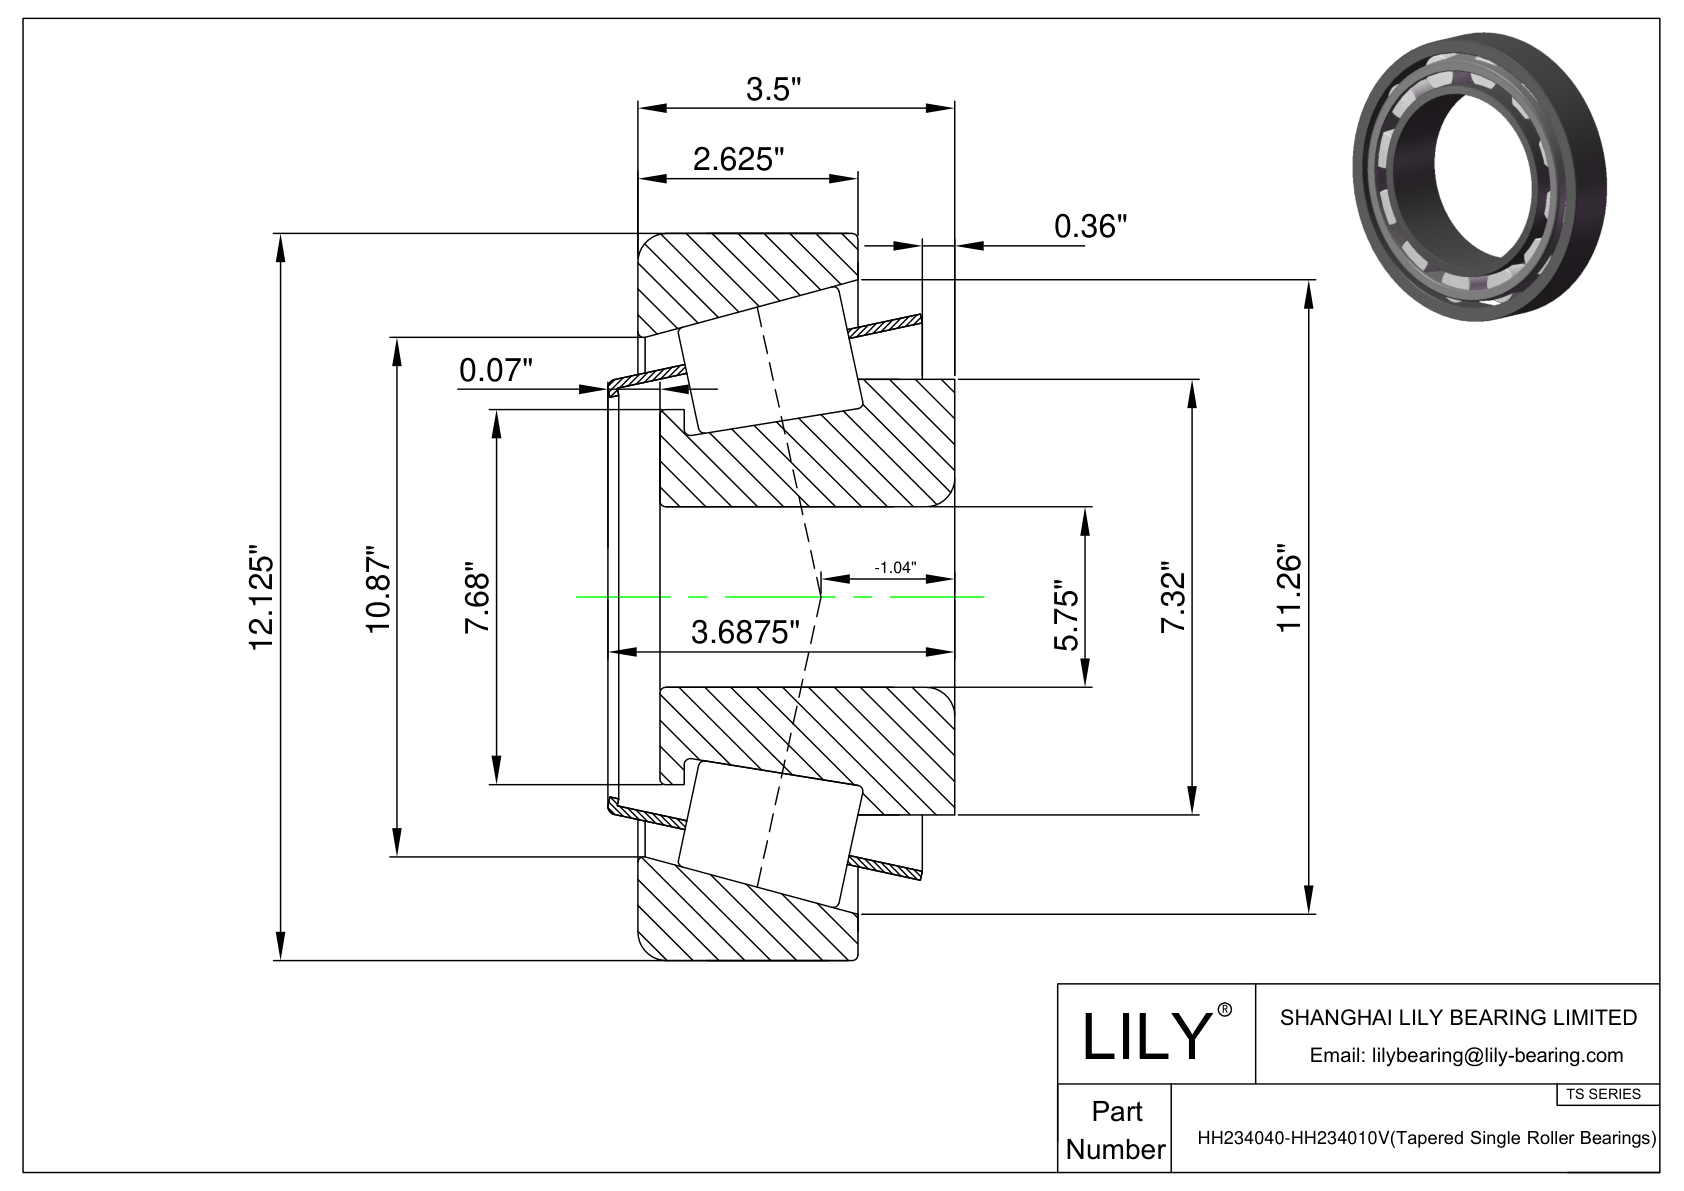 HH234040-HH234010V TS (Tapered Single Roller Bearings) (Imperial) cad drawing